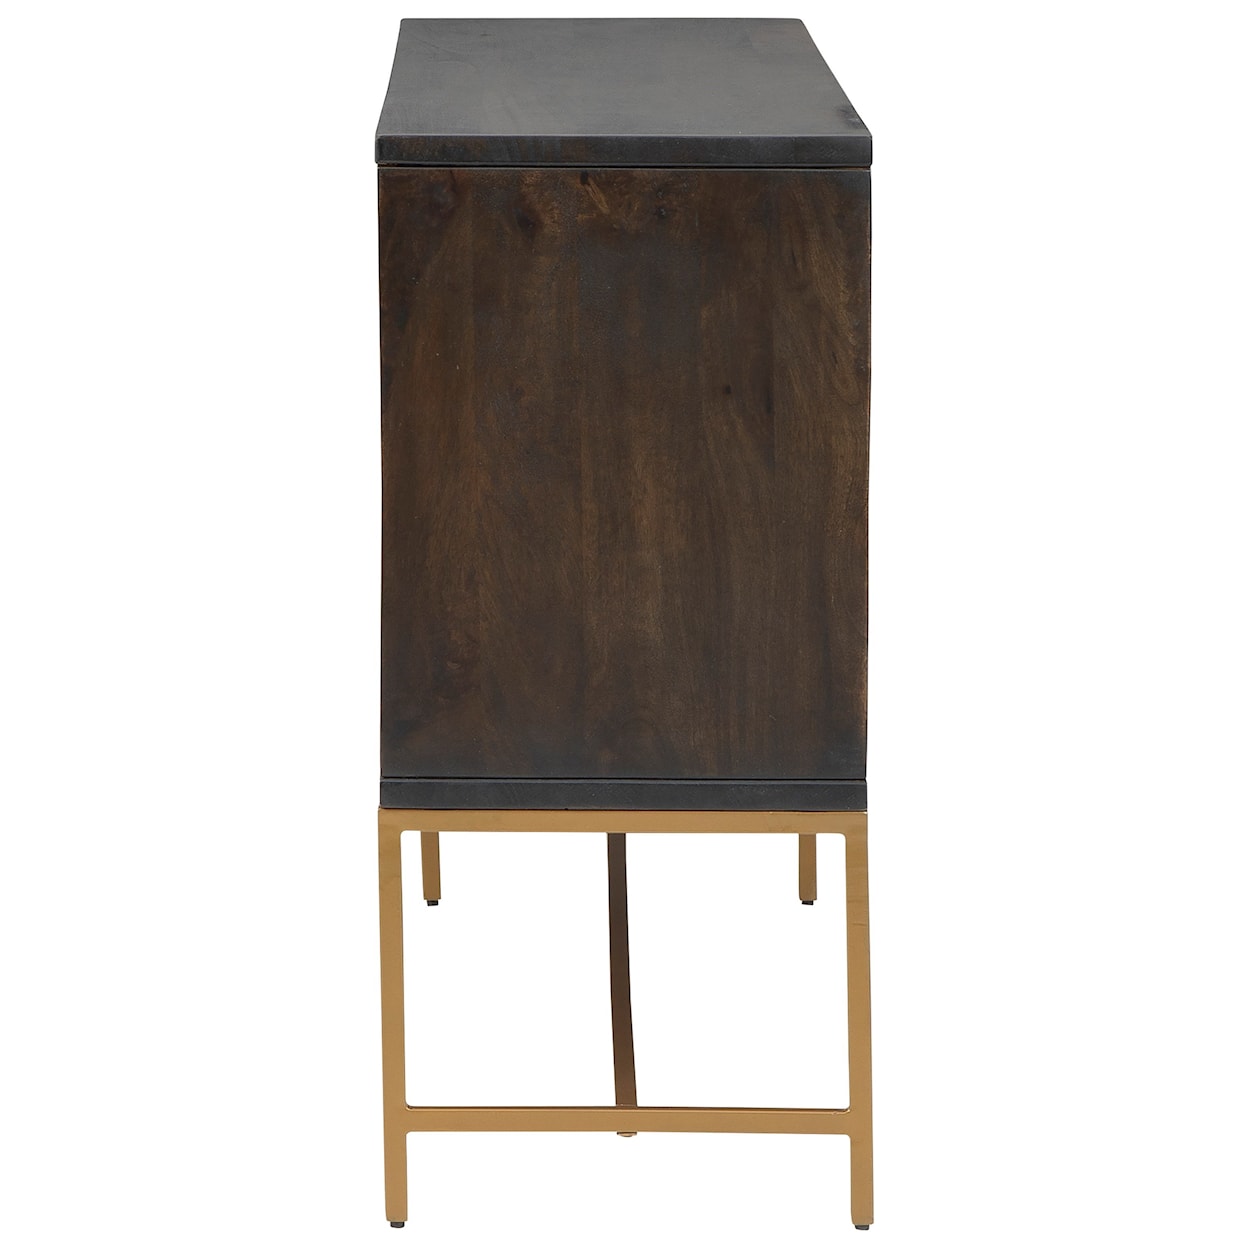 Michael Alan Select Elinmore Accent Cabinet